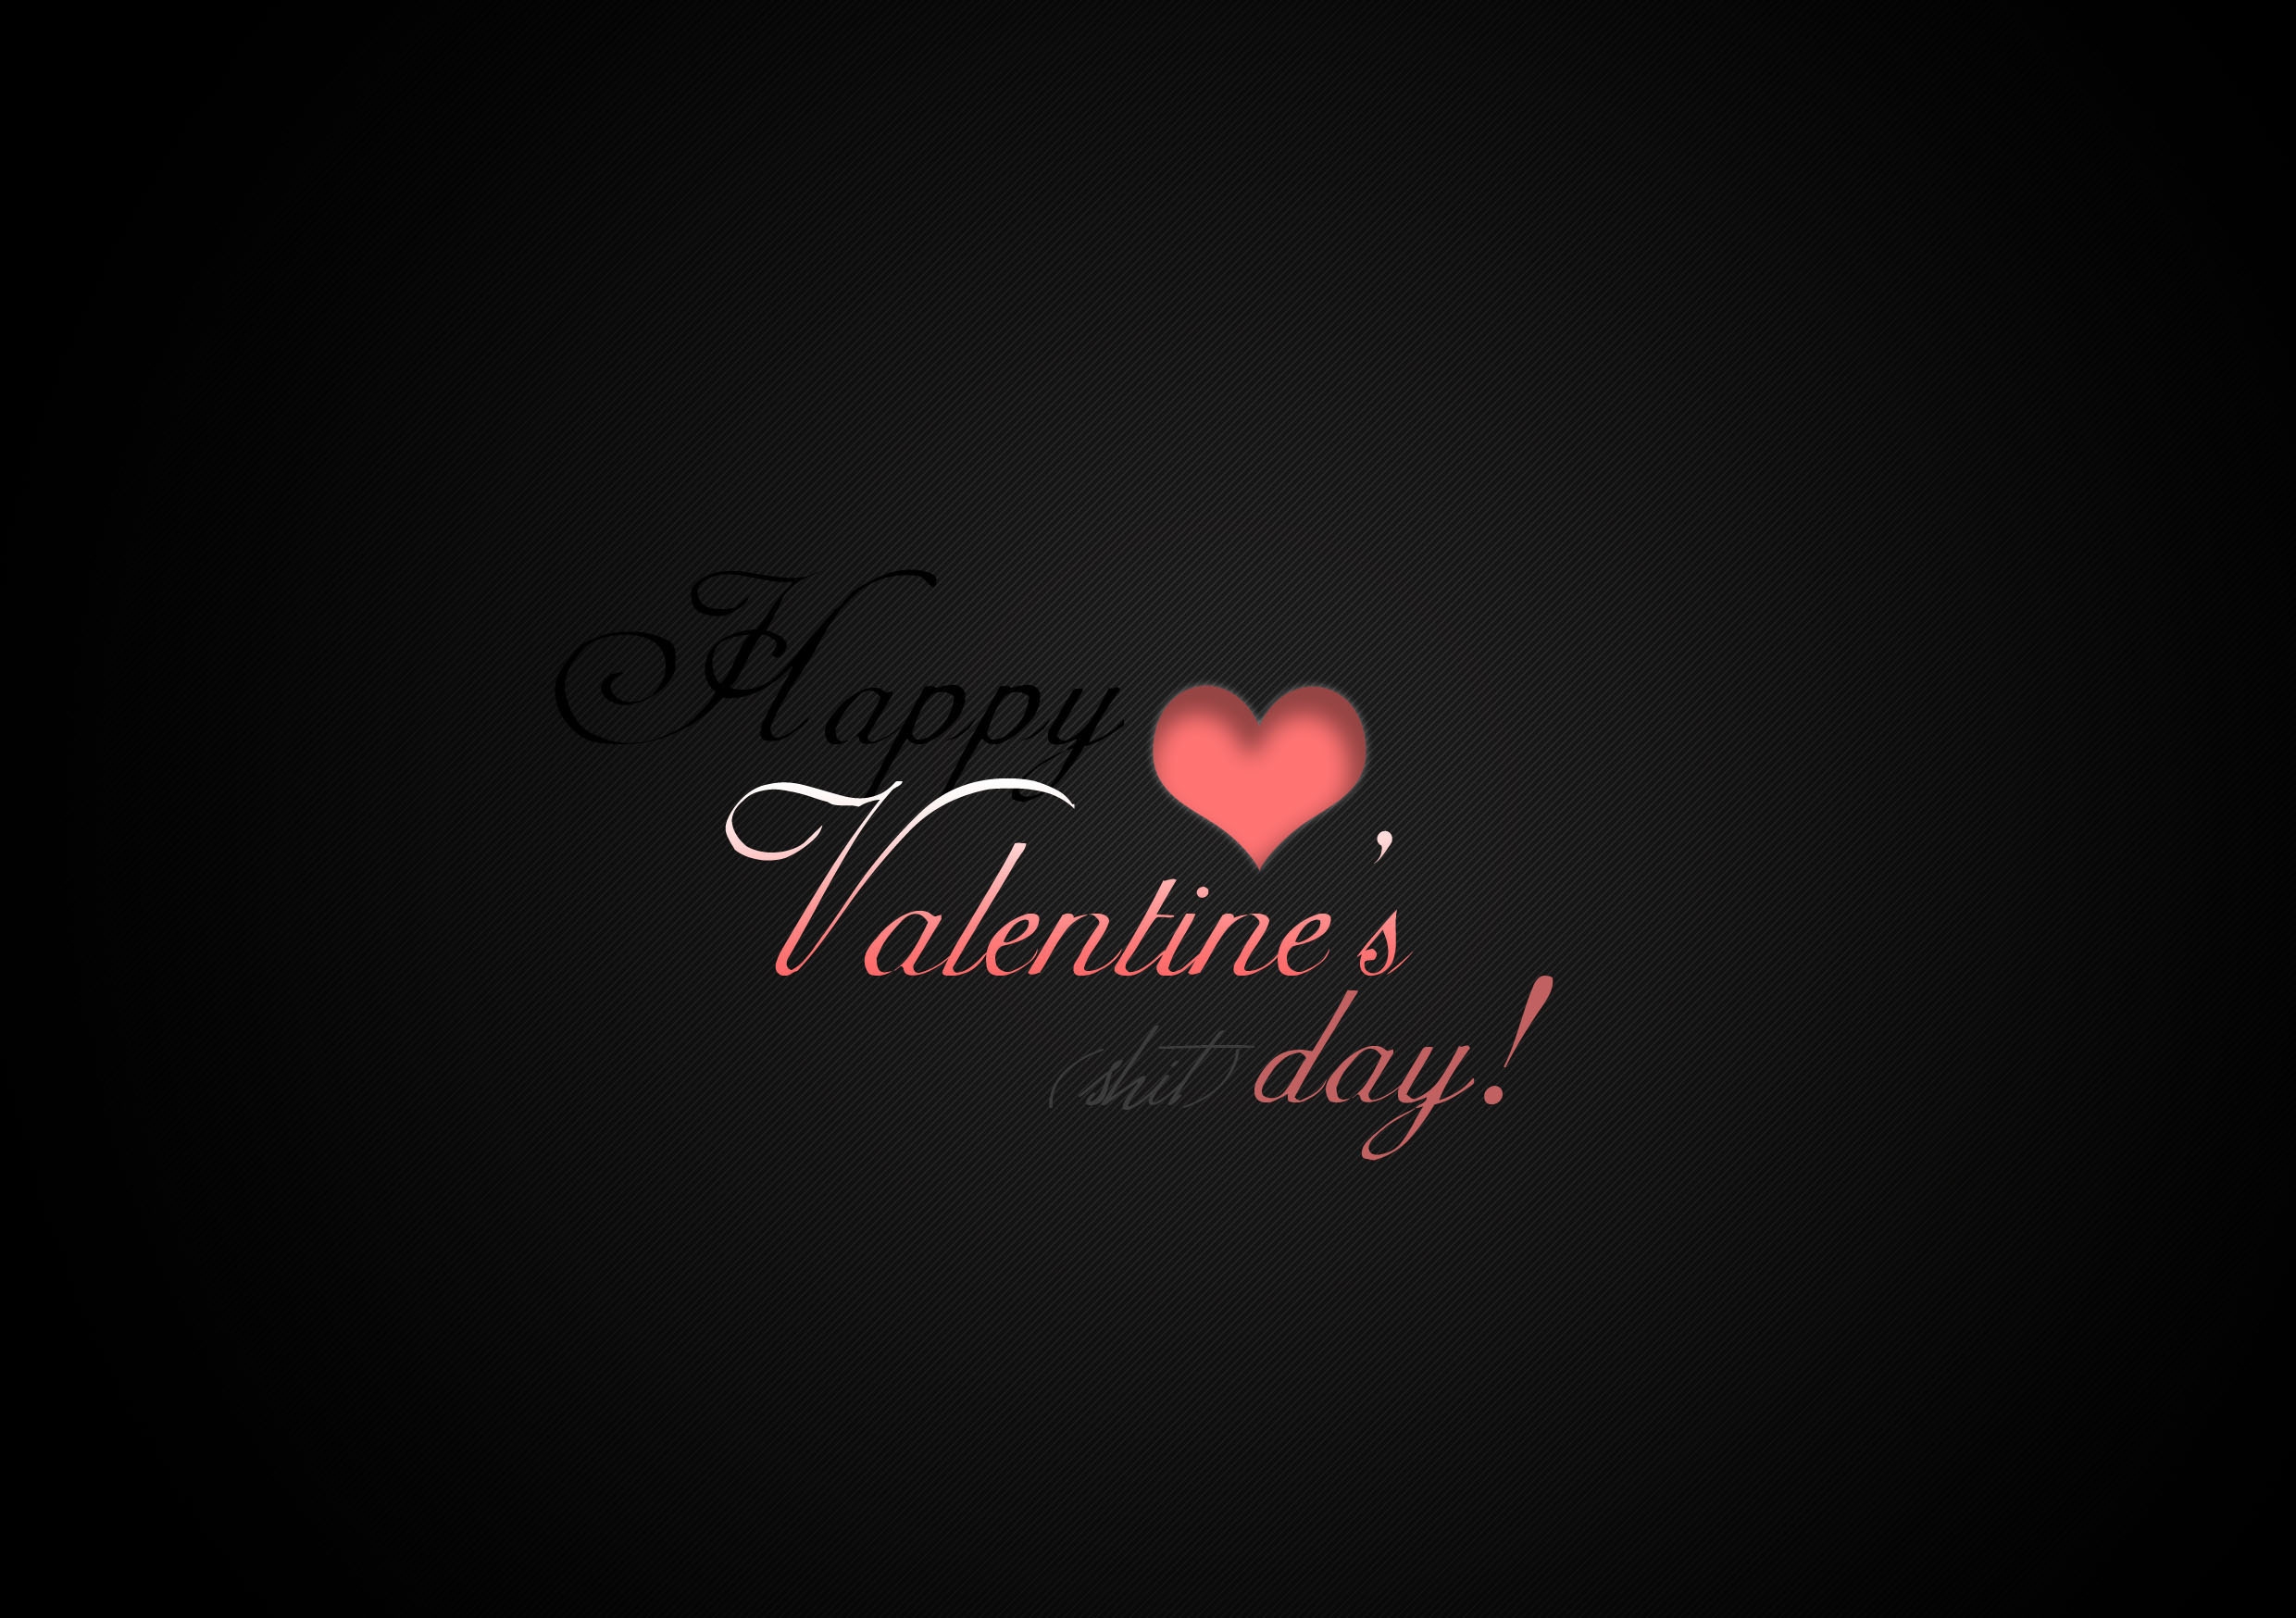 celebrate-love-not-just-one-day-but-every-day-valentines-day